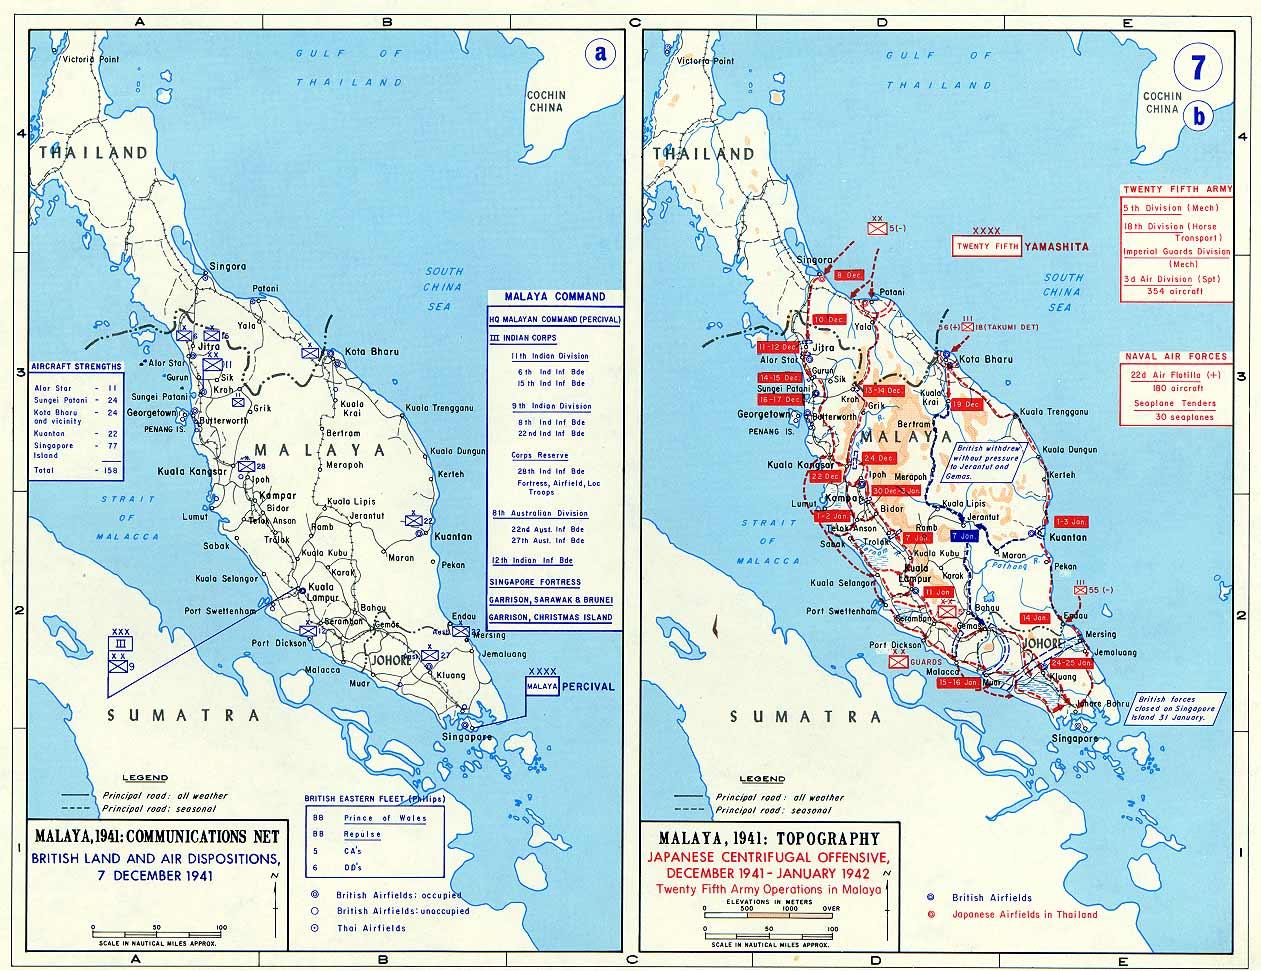 Maps depicting British dispositions in Malaya and Singapore on 7 Dec 1941 and the Japanese advance from Dec 1941 to Jan 1942